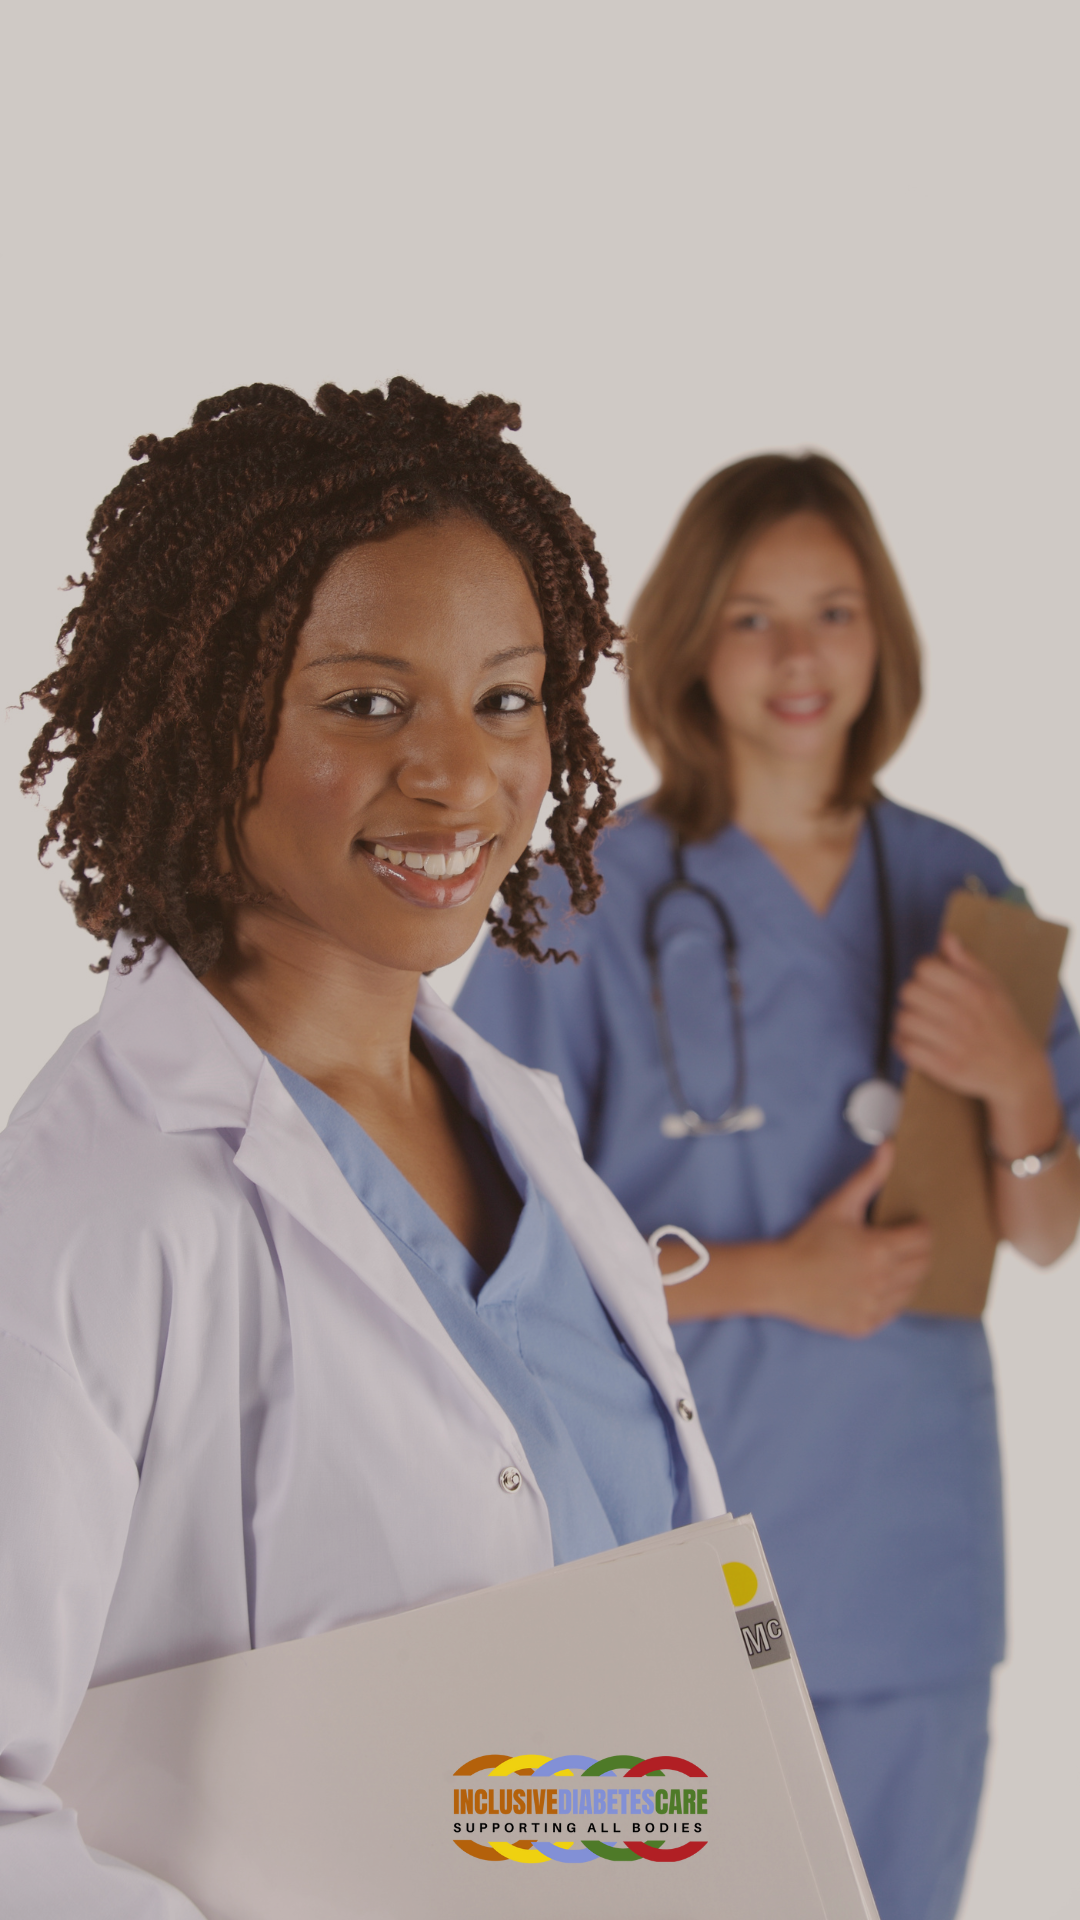 Image of two healthcare professionals in scrubs